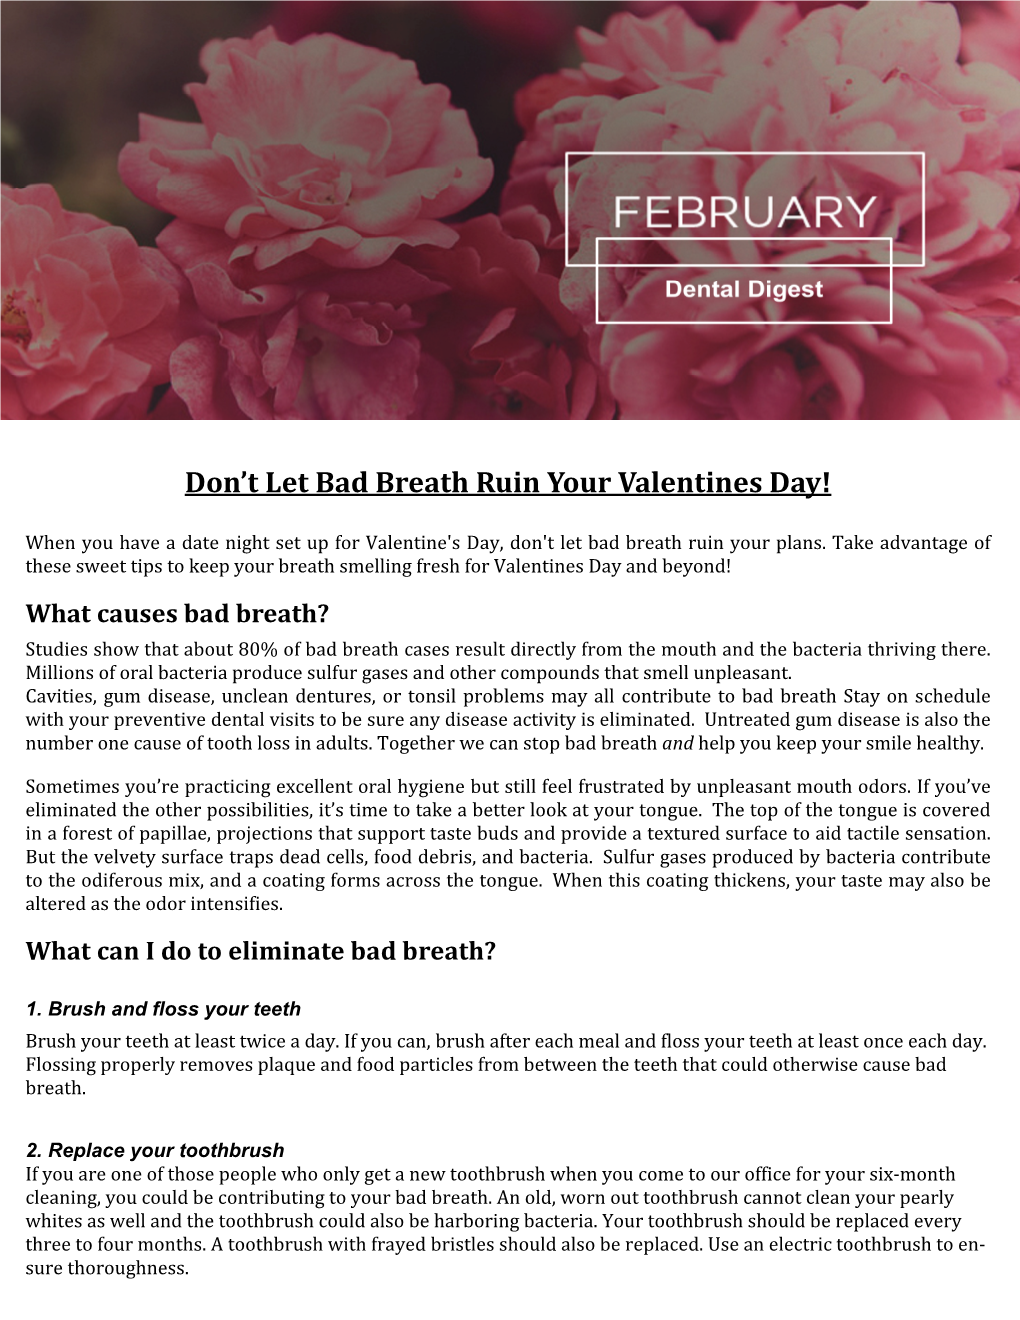 Don't Let Bad Breath Ruin Your Valentines Day!